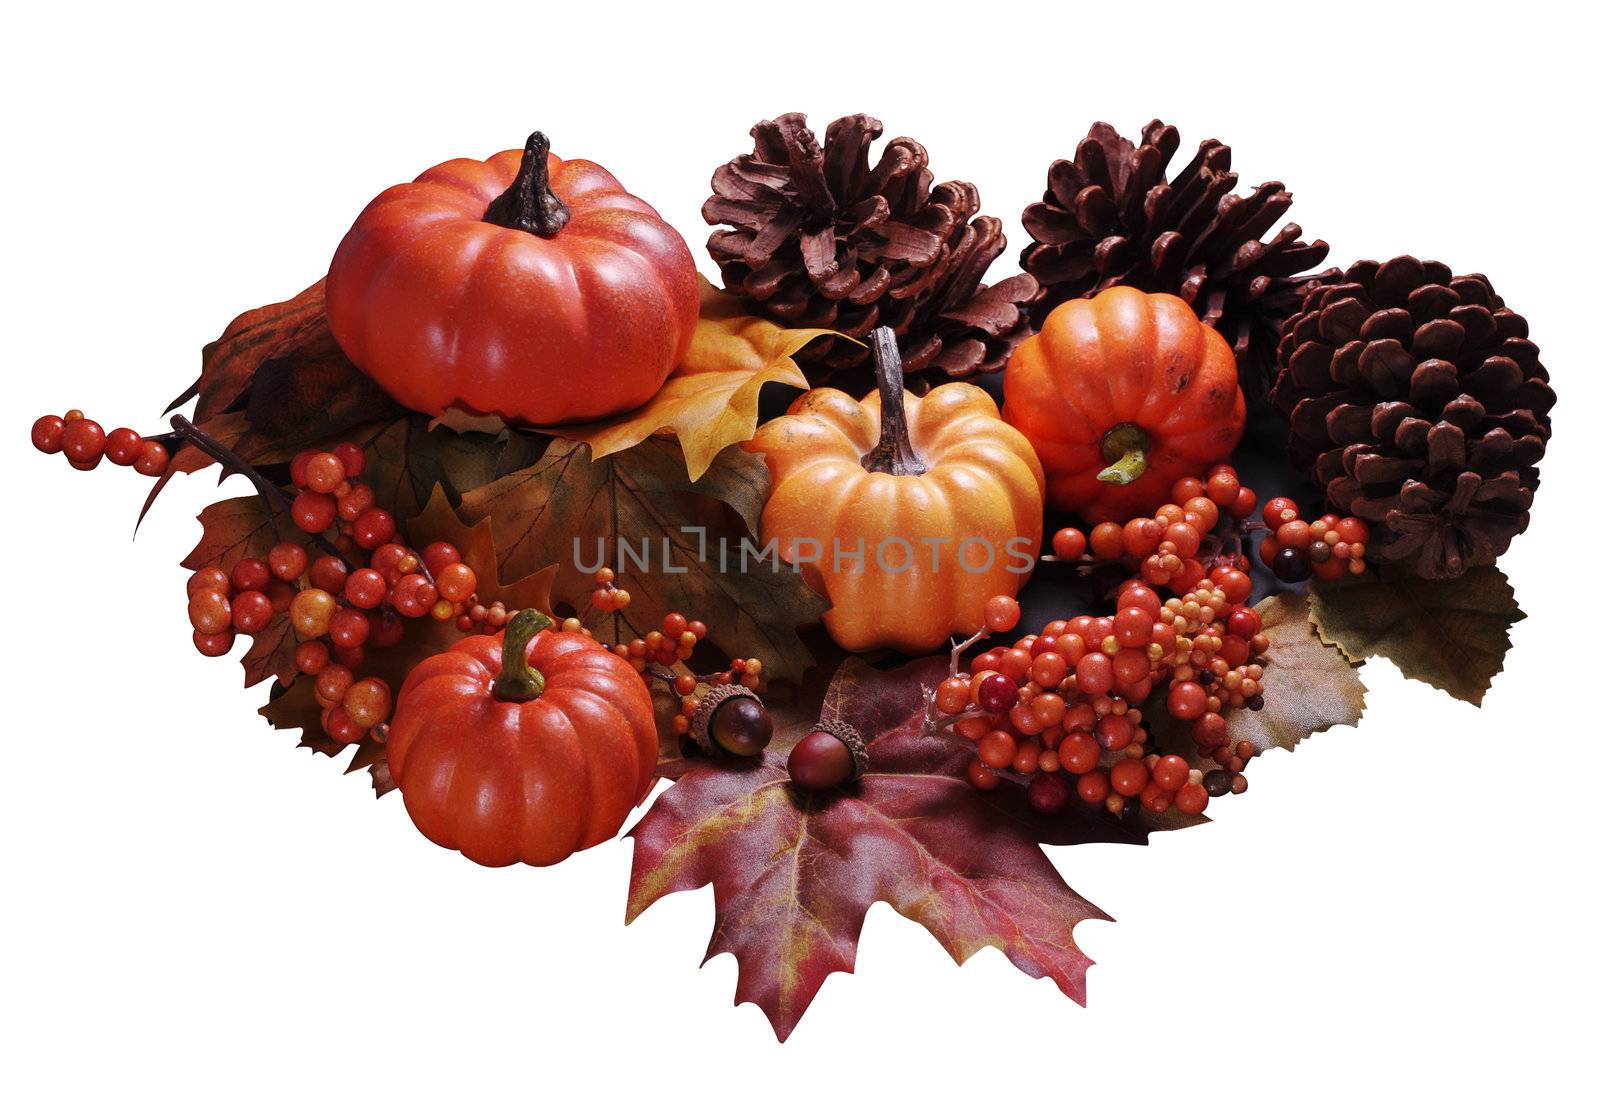 Pumpkins, autumn leaves, berries, and pinecones make up this fall arrangement.  Isolated on white.